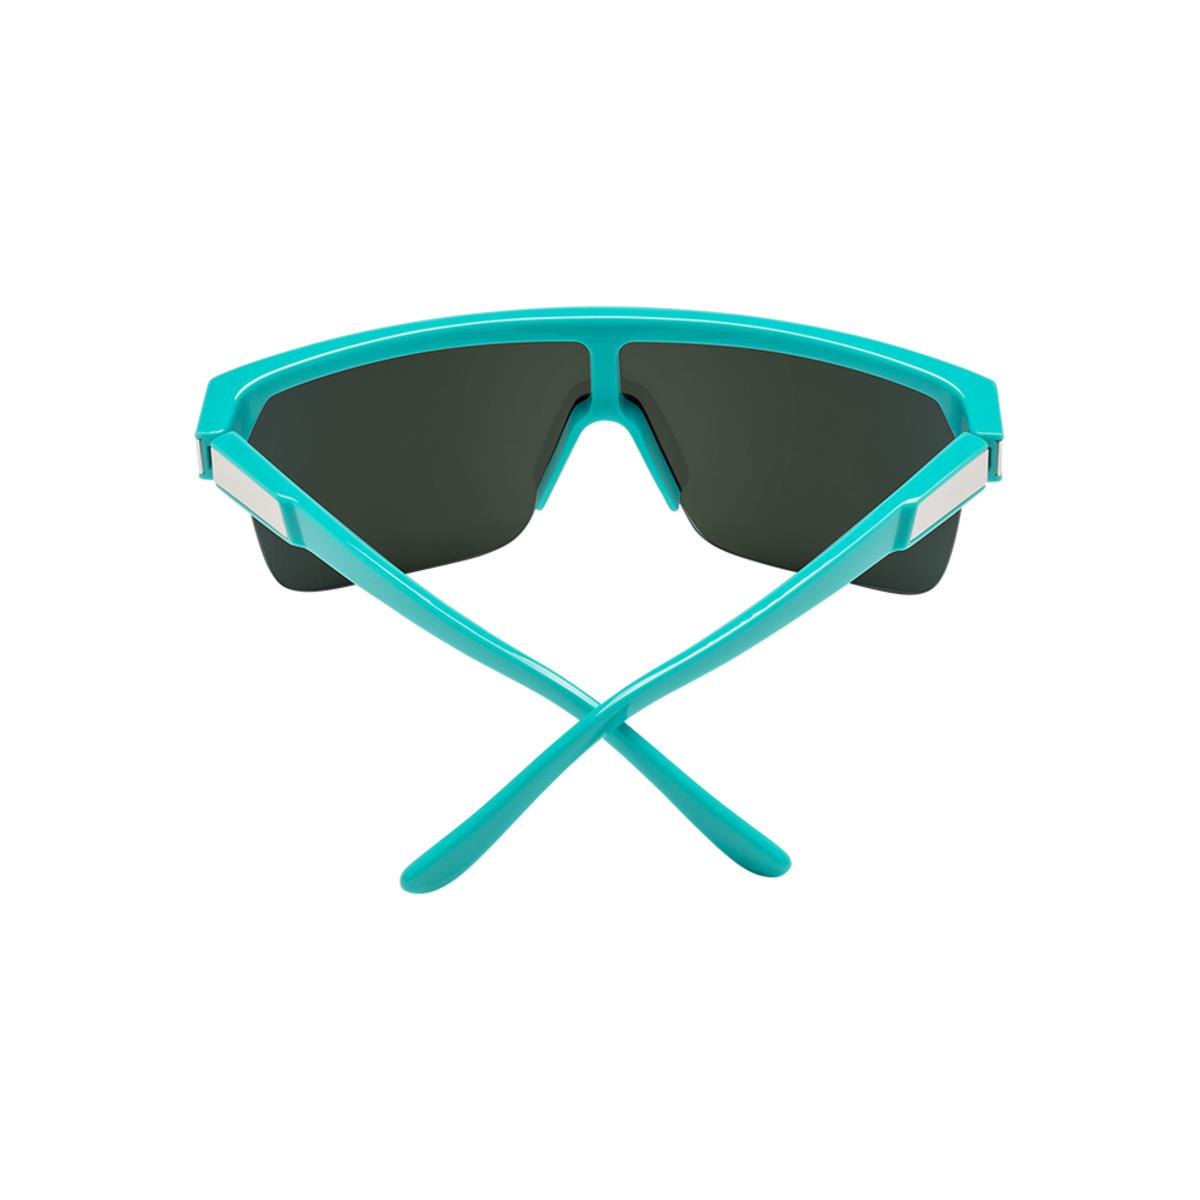 Spy Optic Flynn 5050 Teal - HD Plus Gray Green with Pink Spectra Mirror